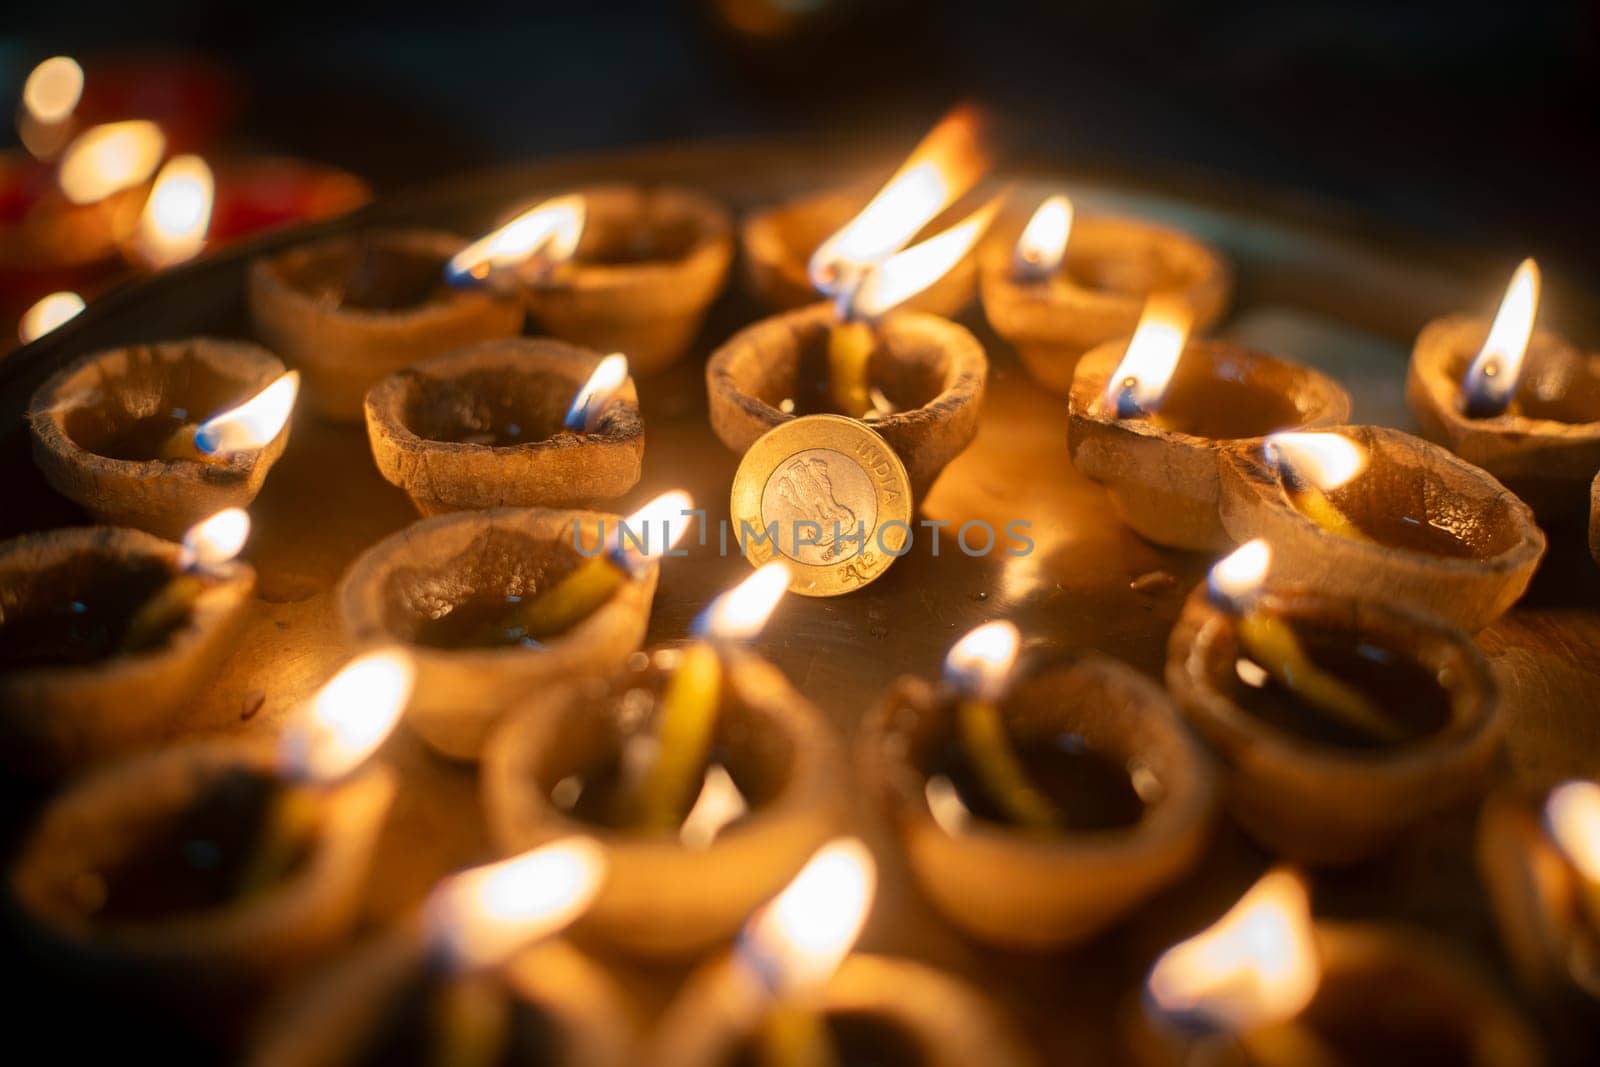 macro shot showing a circle of diya oil lamps around a rupee coin showing the offerings and prayers to the hindu wealth goddess lakshmi in India